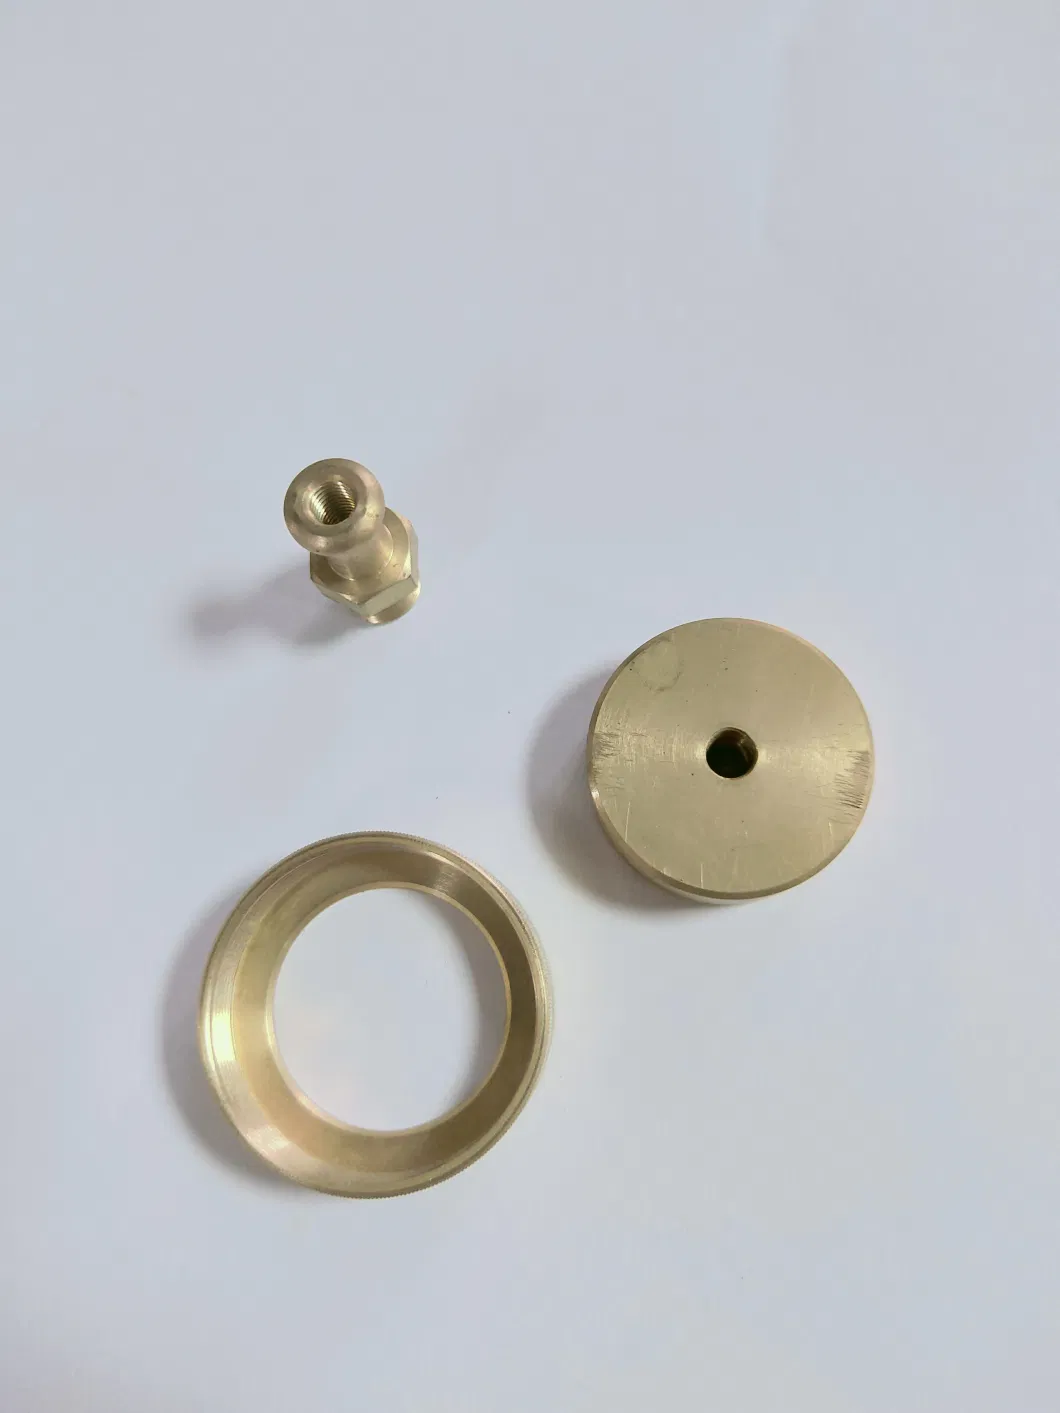 Material Copper Alloy Machining Round Part